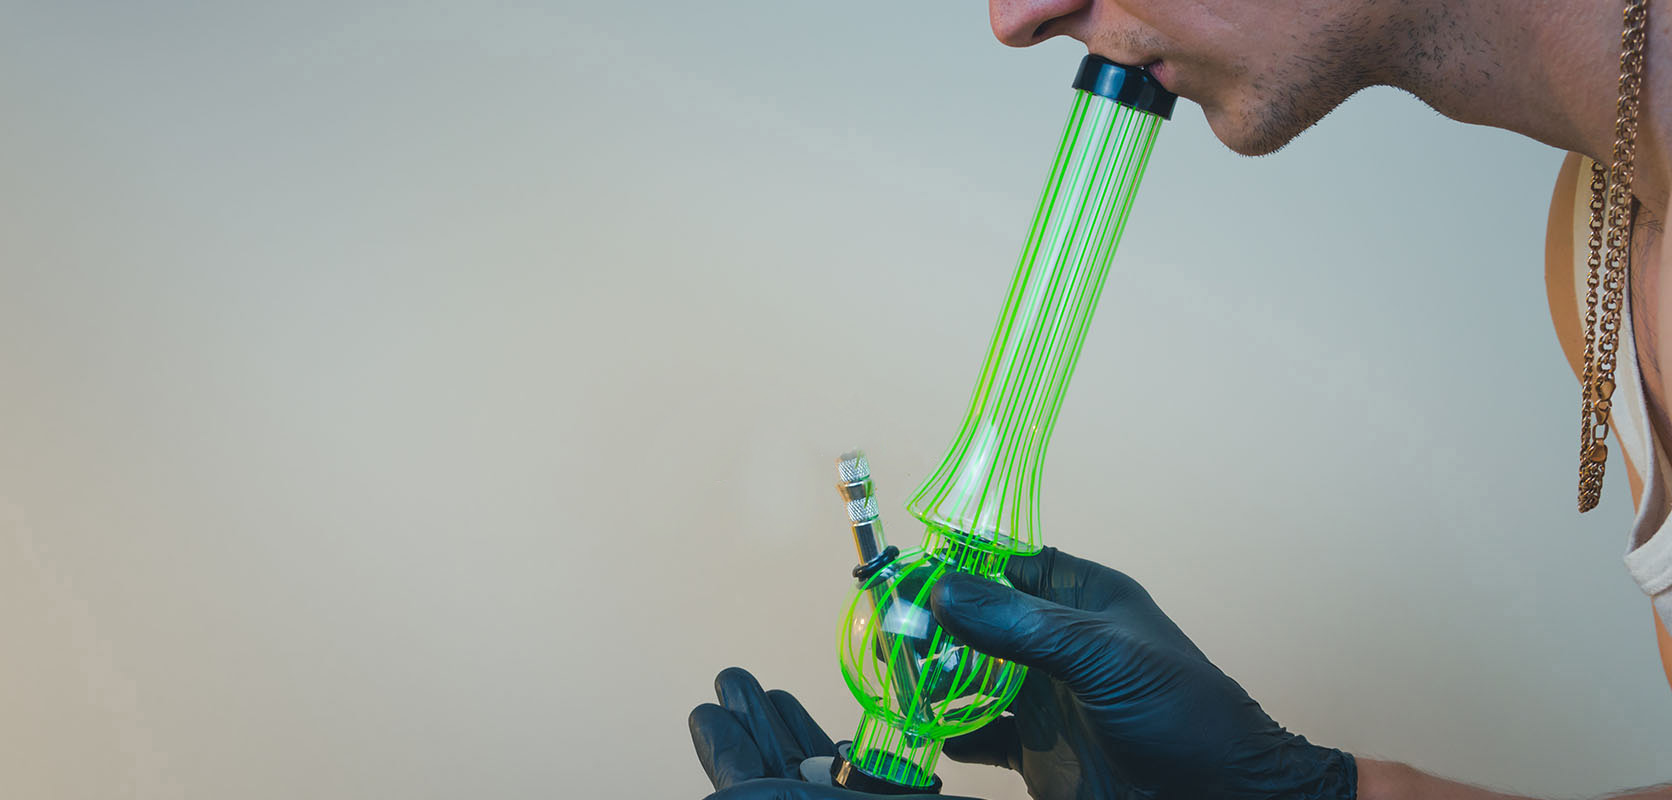 Man using a dab rig to smoke shatter. Buy shatter online, THC concentrates, supreme thc cartridges at online dispensary canada.